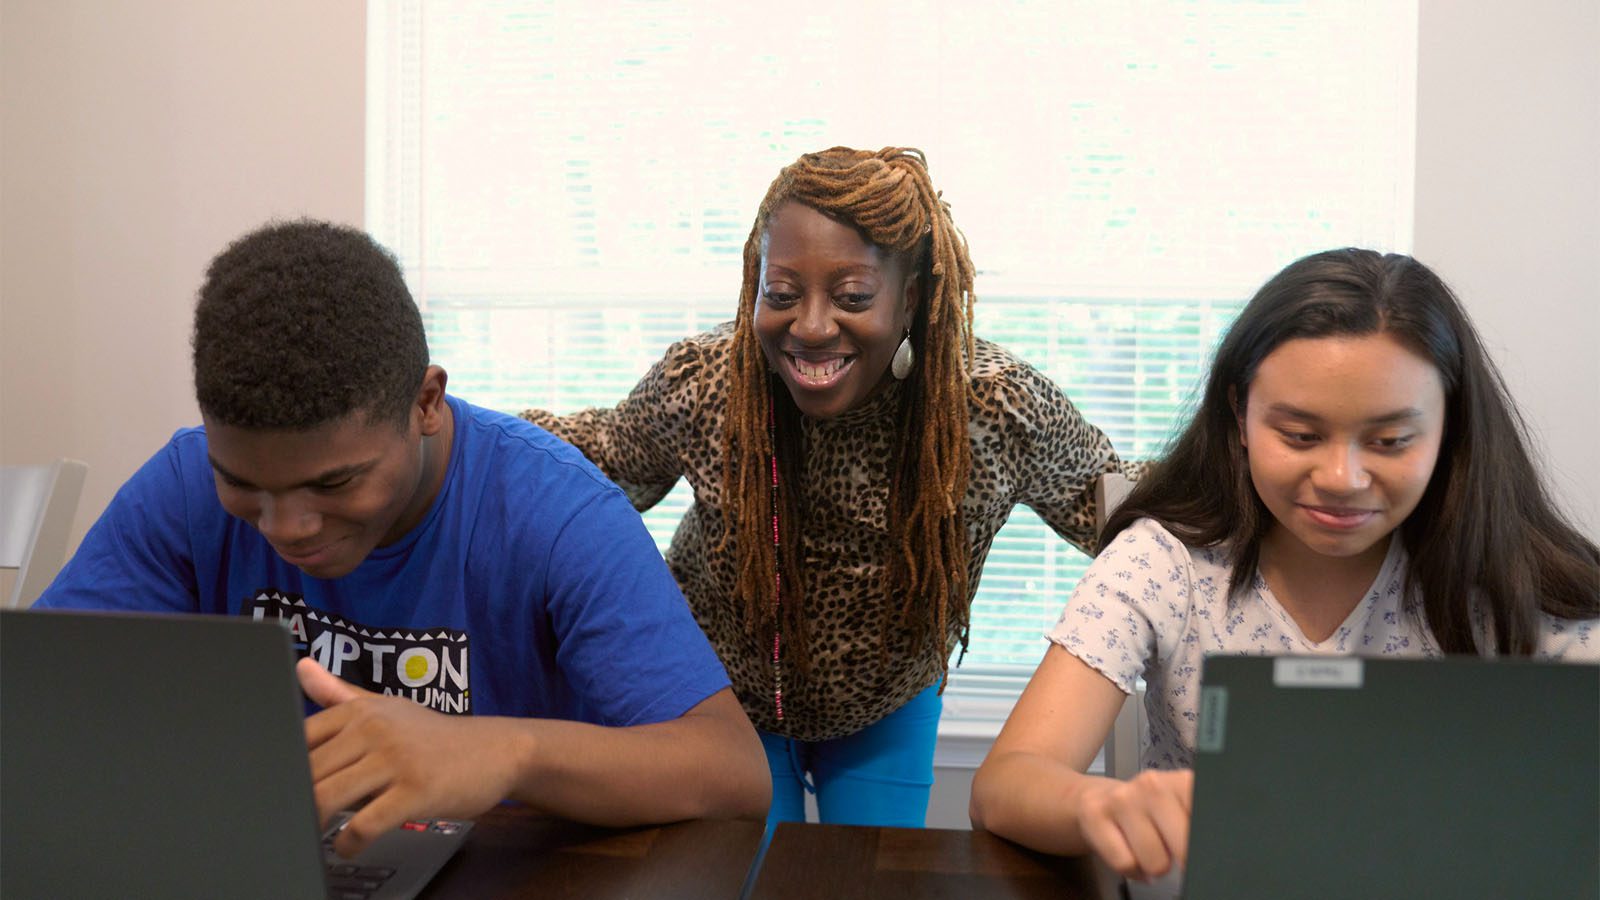 A smiling woman assisting two focused teenagers working on laptops at a table.